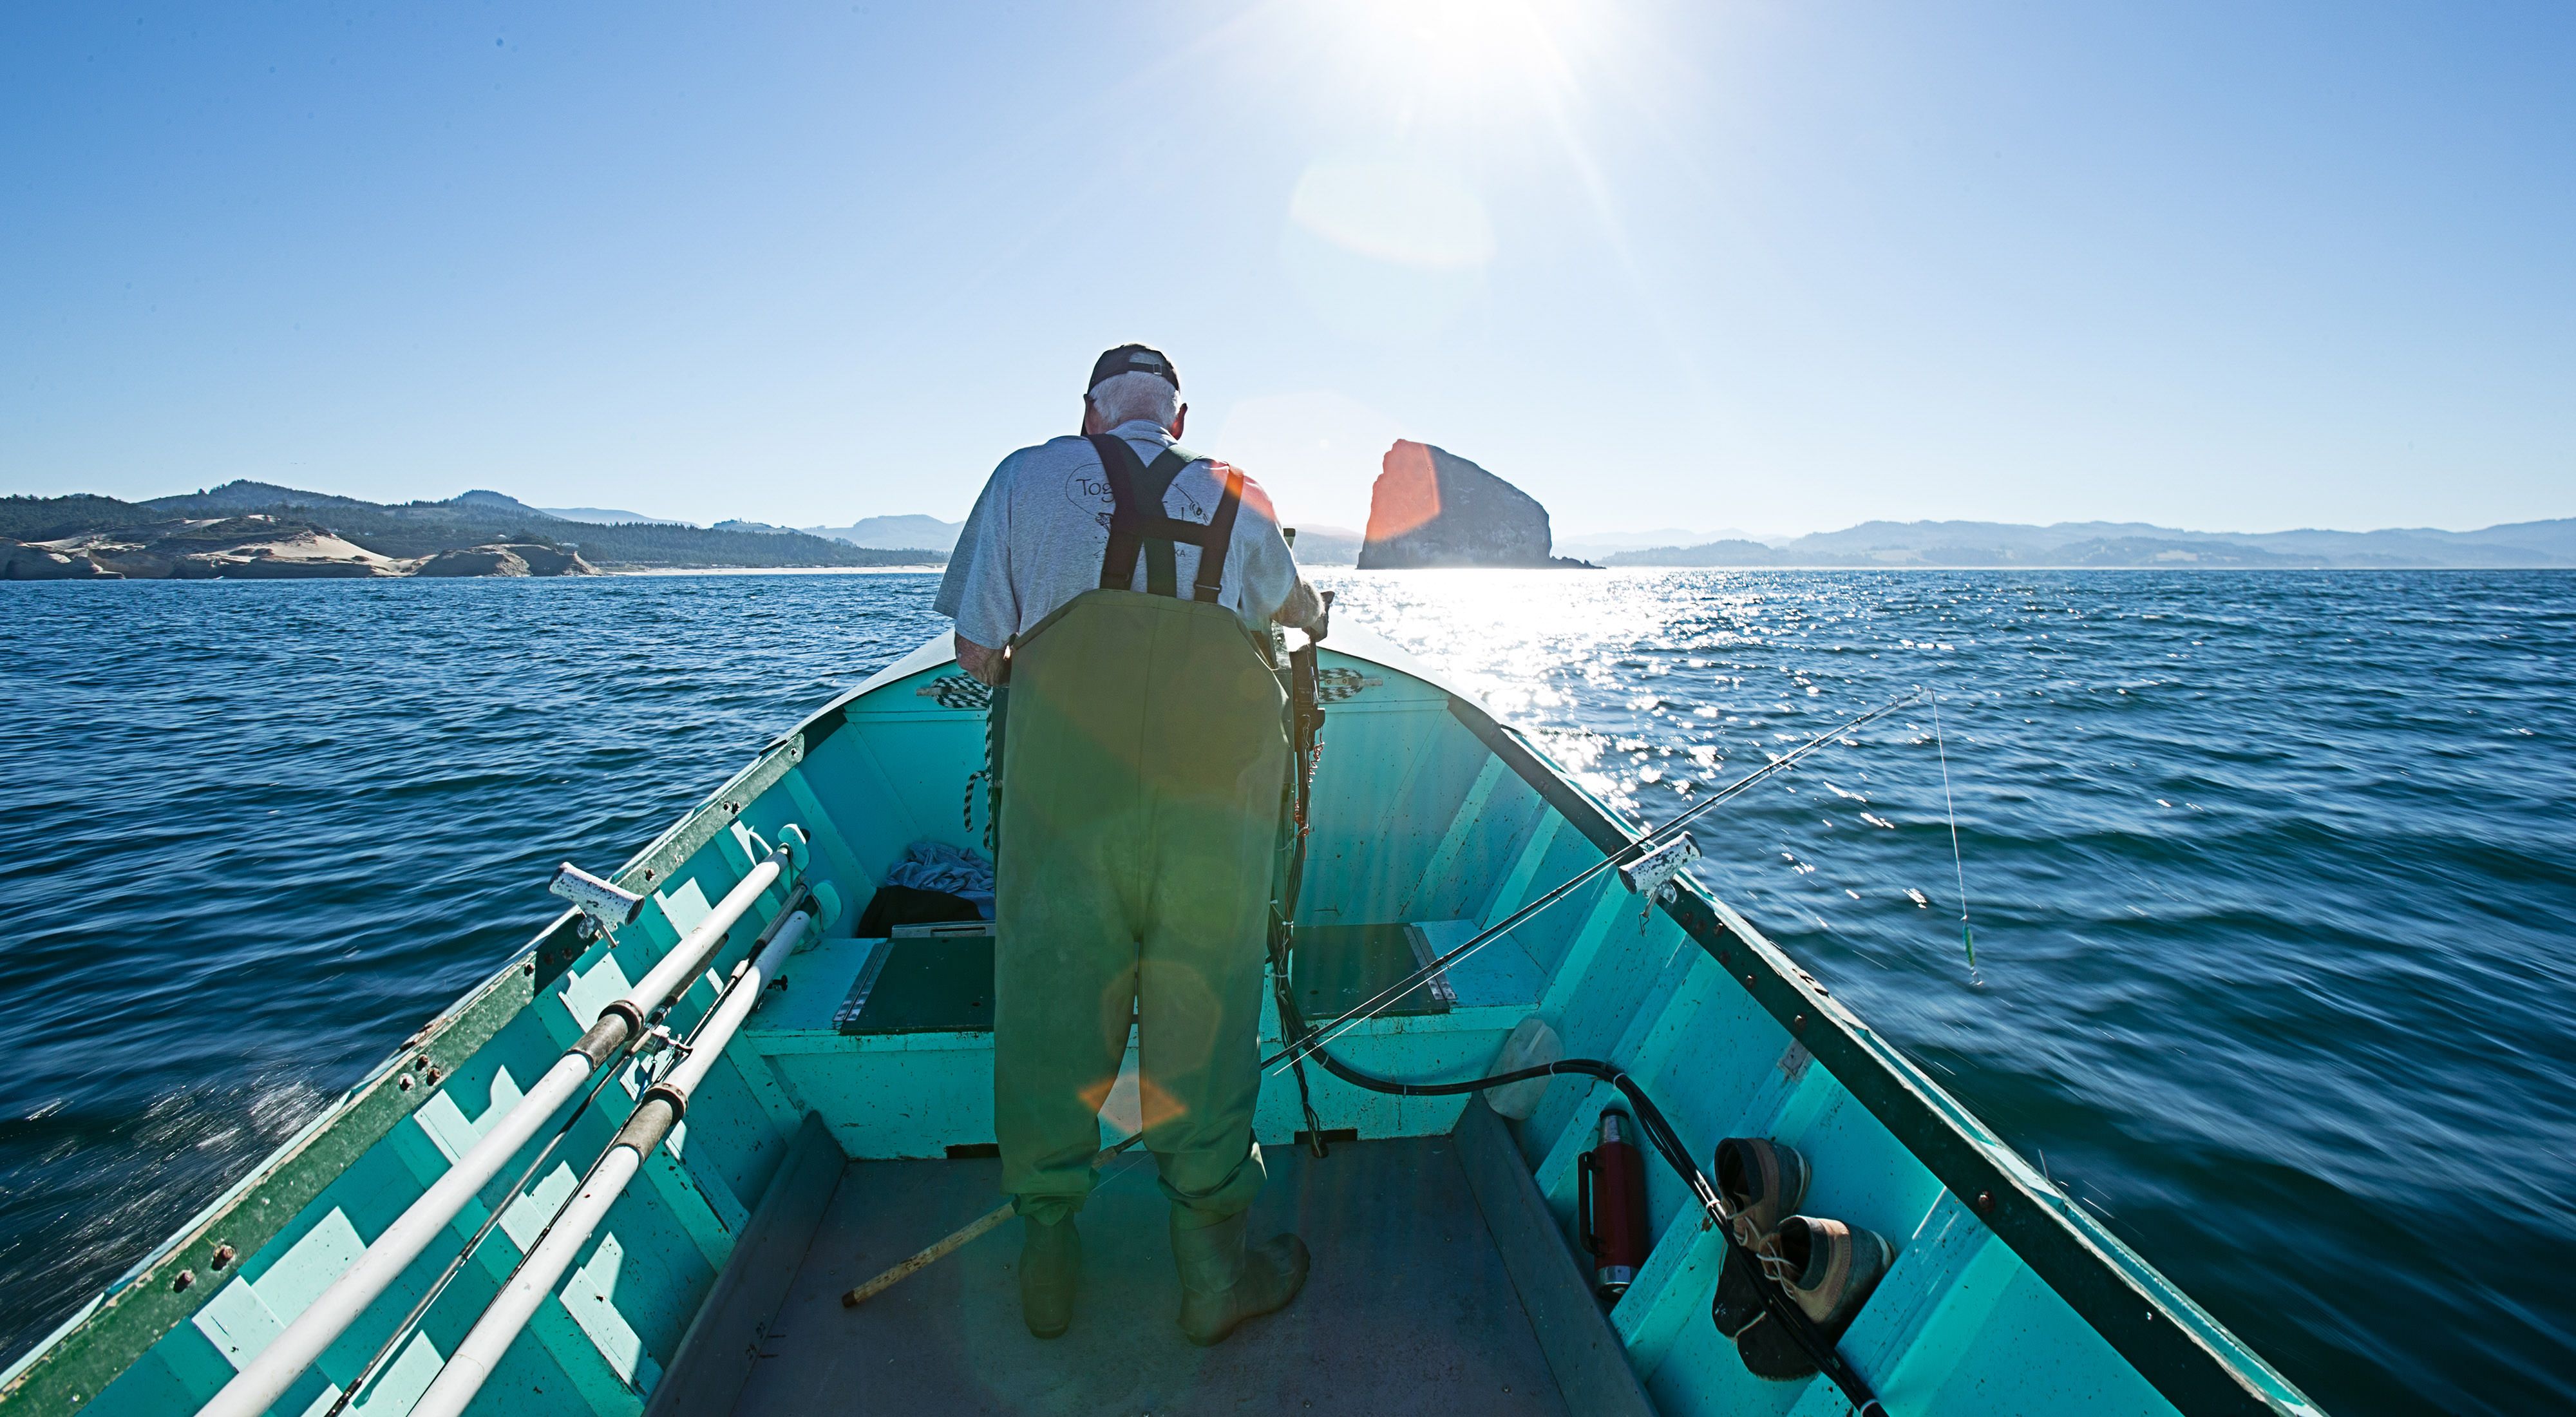 A man wearing waders stands at the bow of a small boat on a wide body of water.